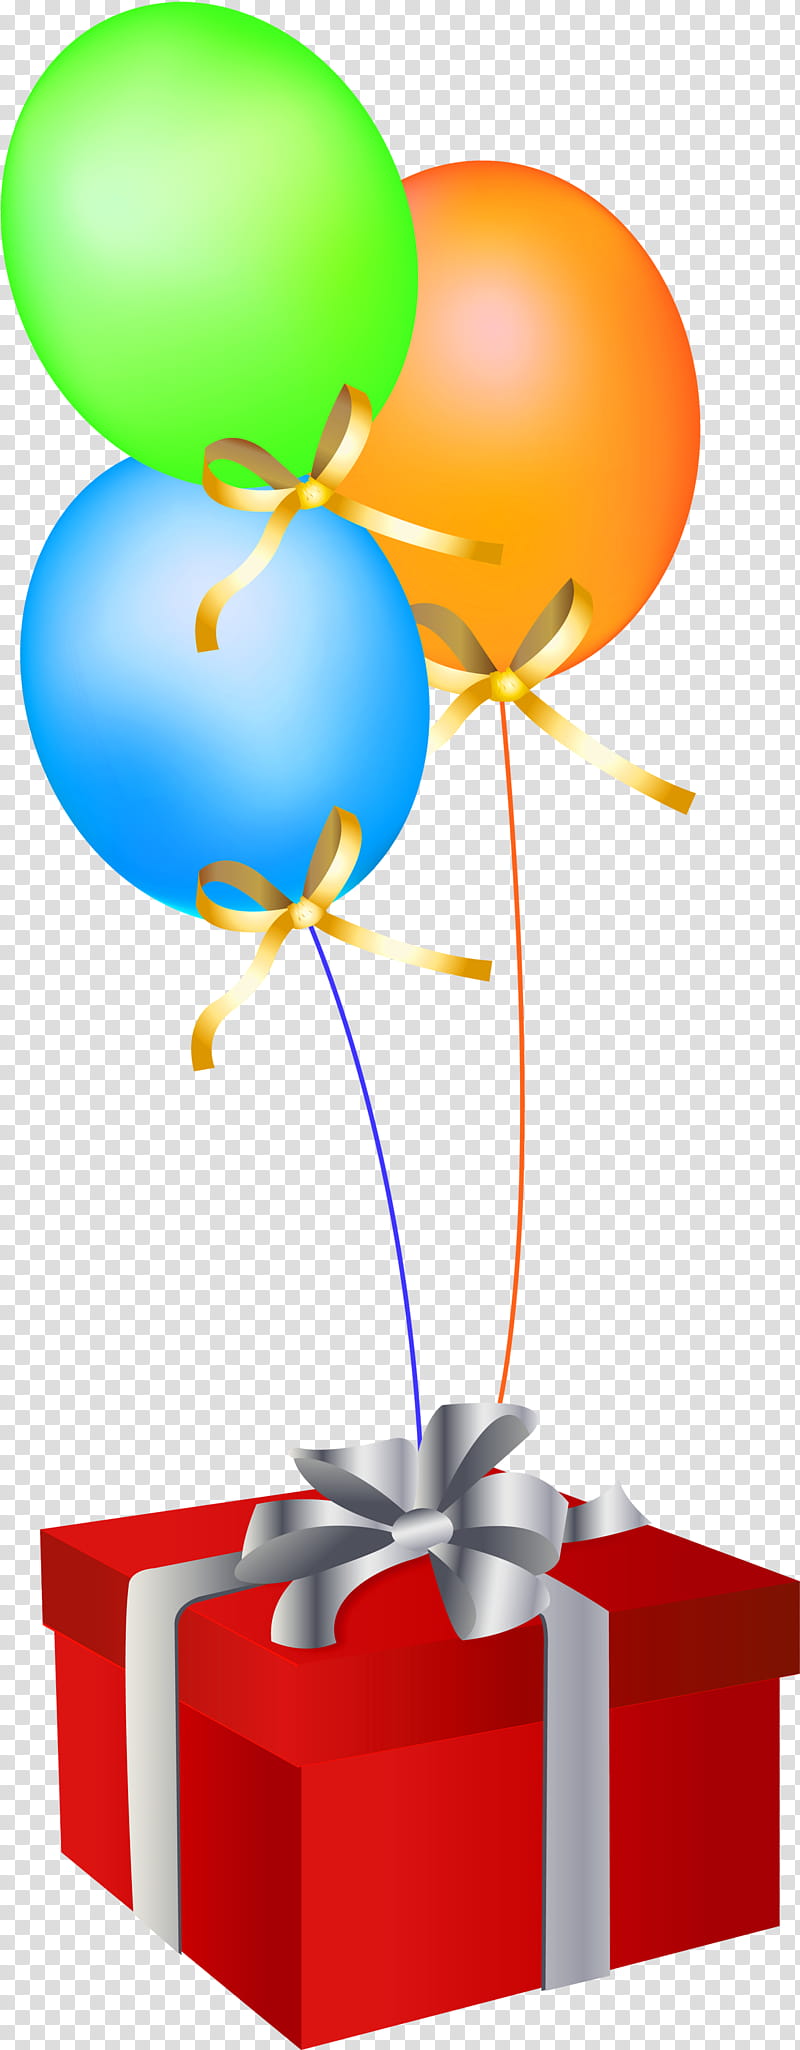 Birthday Party, Balloon, Gift, Greeting Note Cards, Balloon Arch, Round Foil Helium Balloon Blue Js 2, Bunch O Balloons, Toy Balloon transparent background PNG clipart